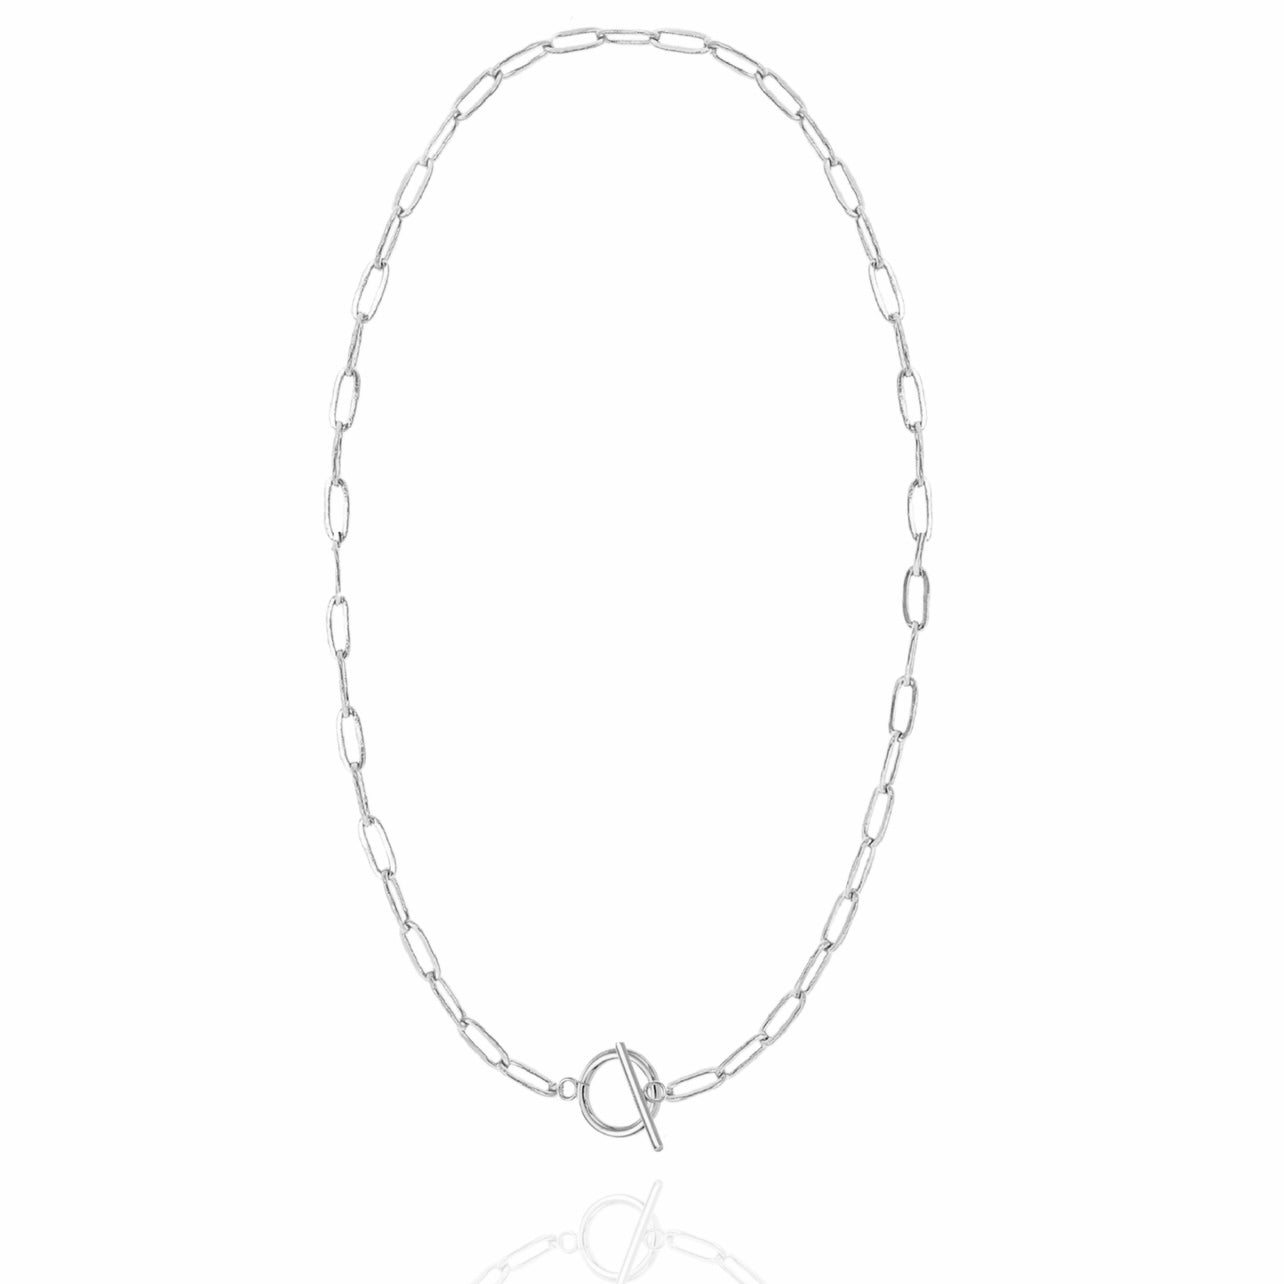 Paperclip Chain Necklace with Toggle Clasp in Silver